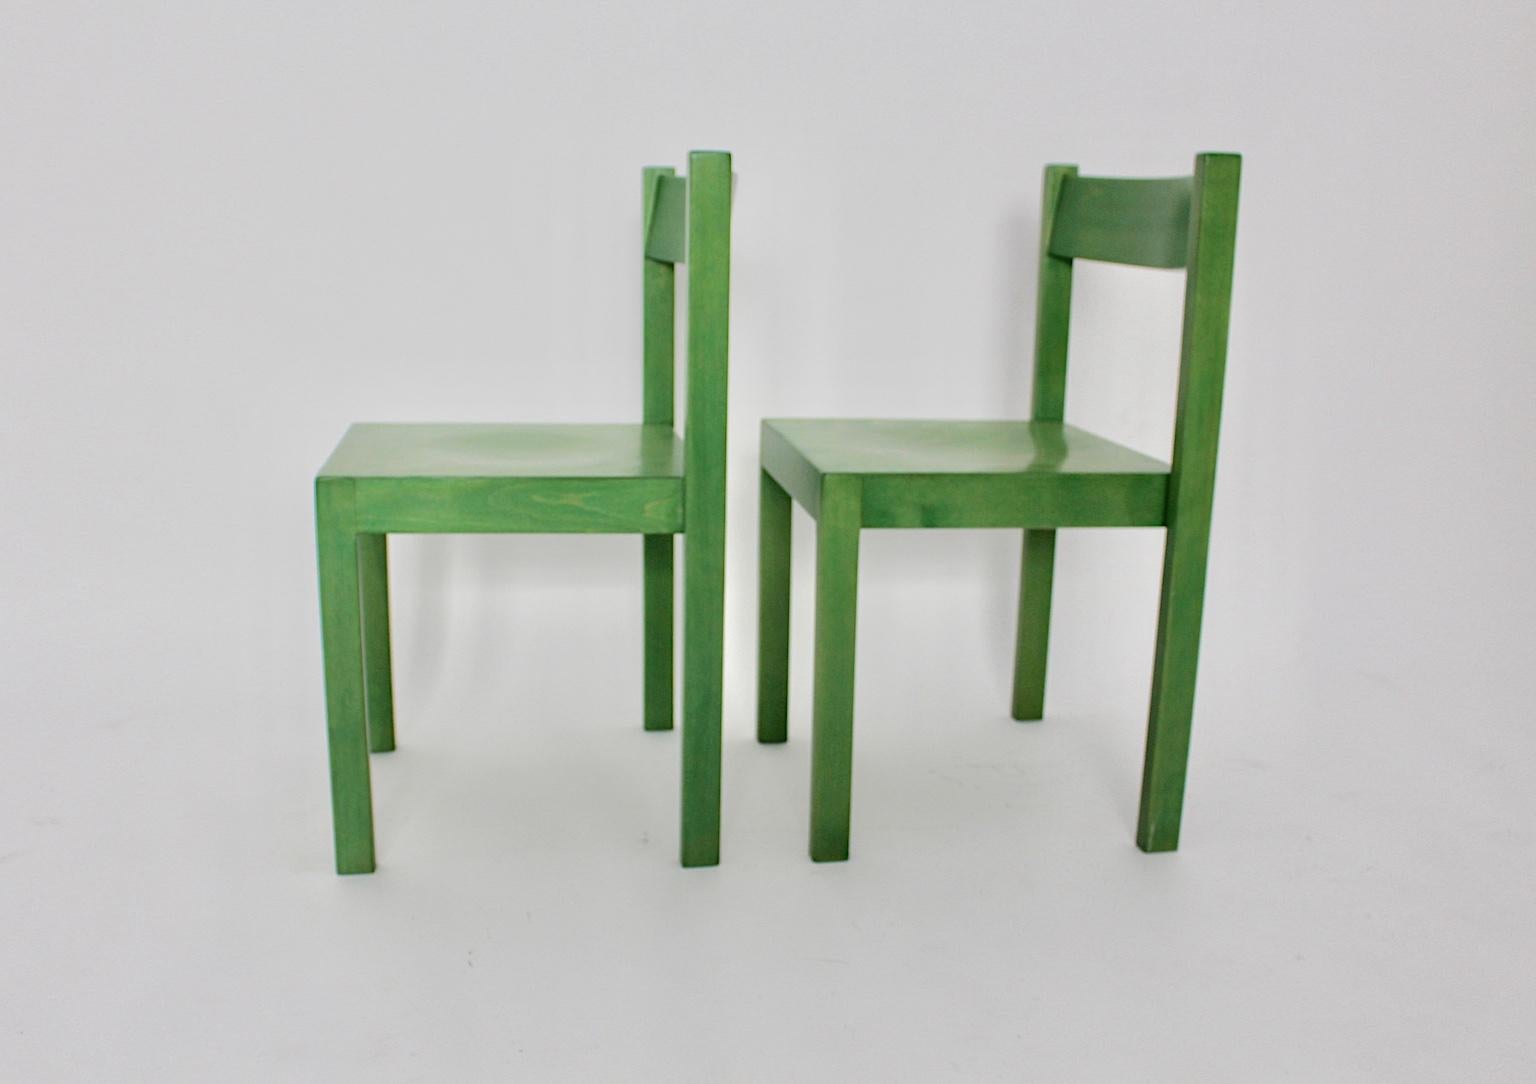 Mid Century Modern set of 2 green vintage dining chairs was designed by Carl Auböck 1956 Vienna and executed by E & A Pollak Vienna.
The dining chairs were made of solid beechwood and plywood and were green stained and lacquered. Furthermore the